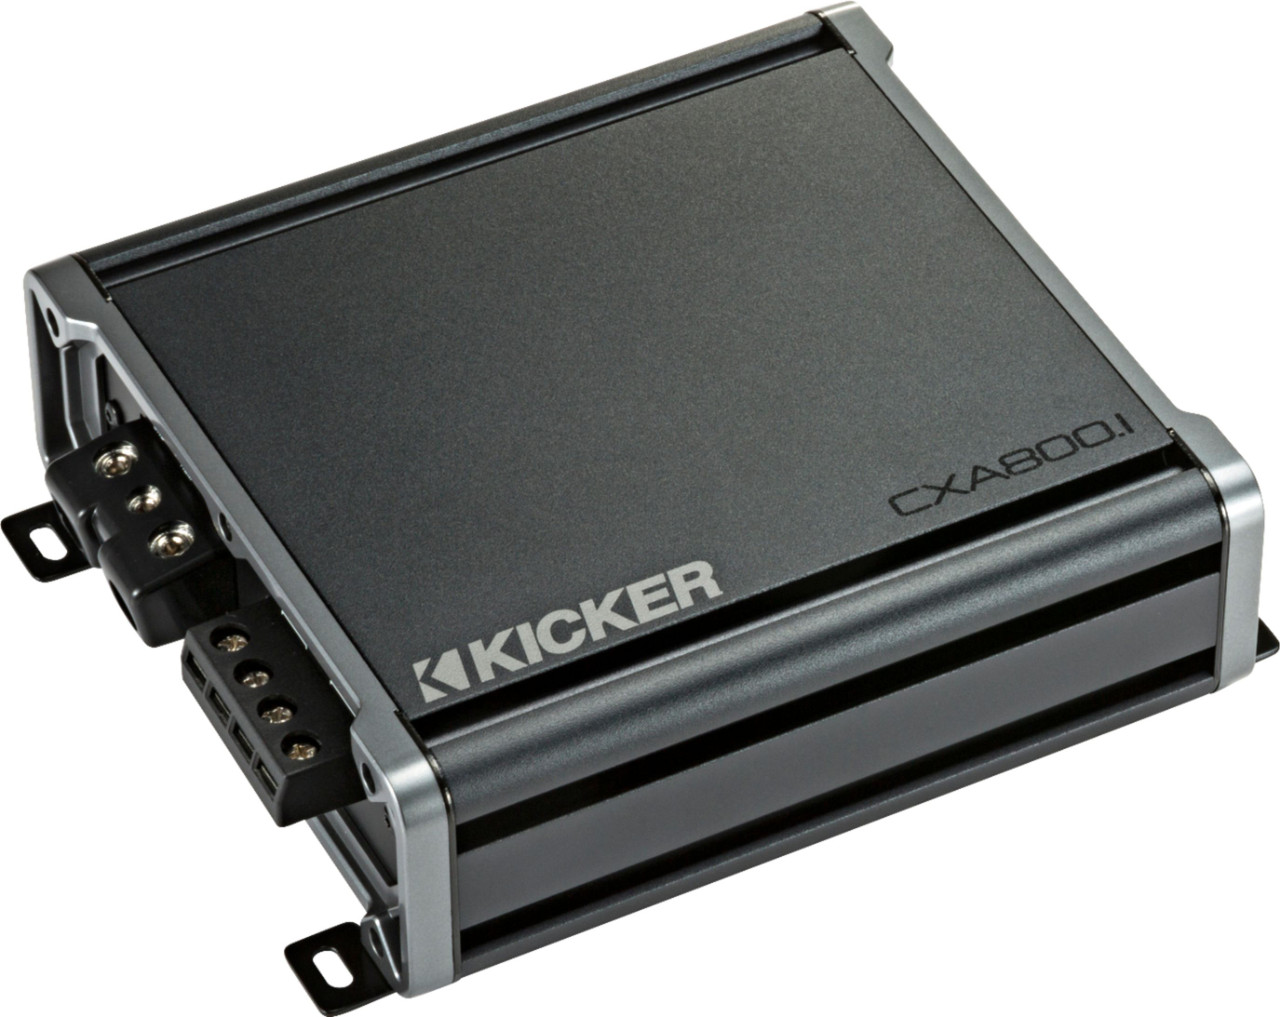 KICKER - CX 800W Class D Digital Mono Amplifier with Variable Low-Pass Crossover - Black